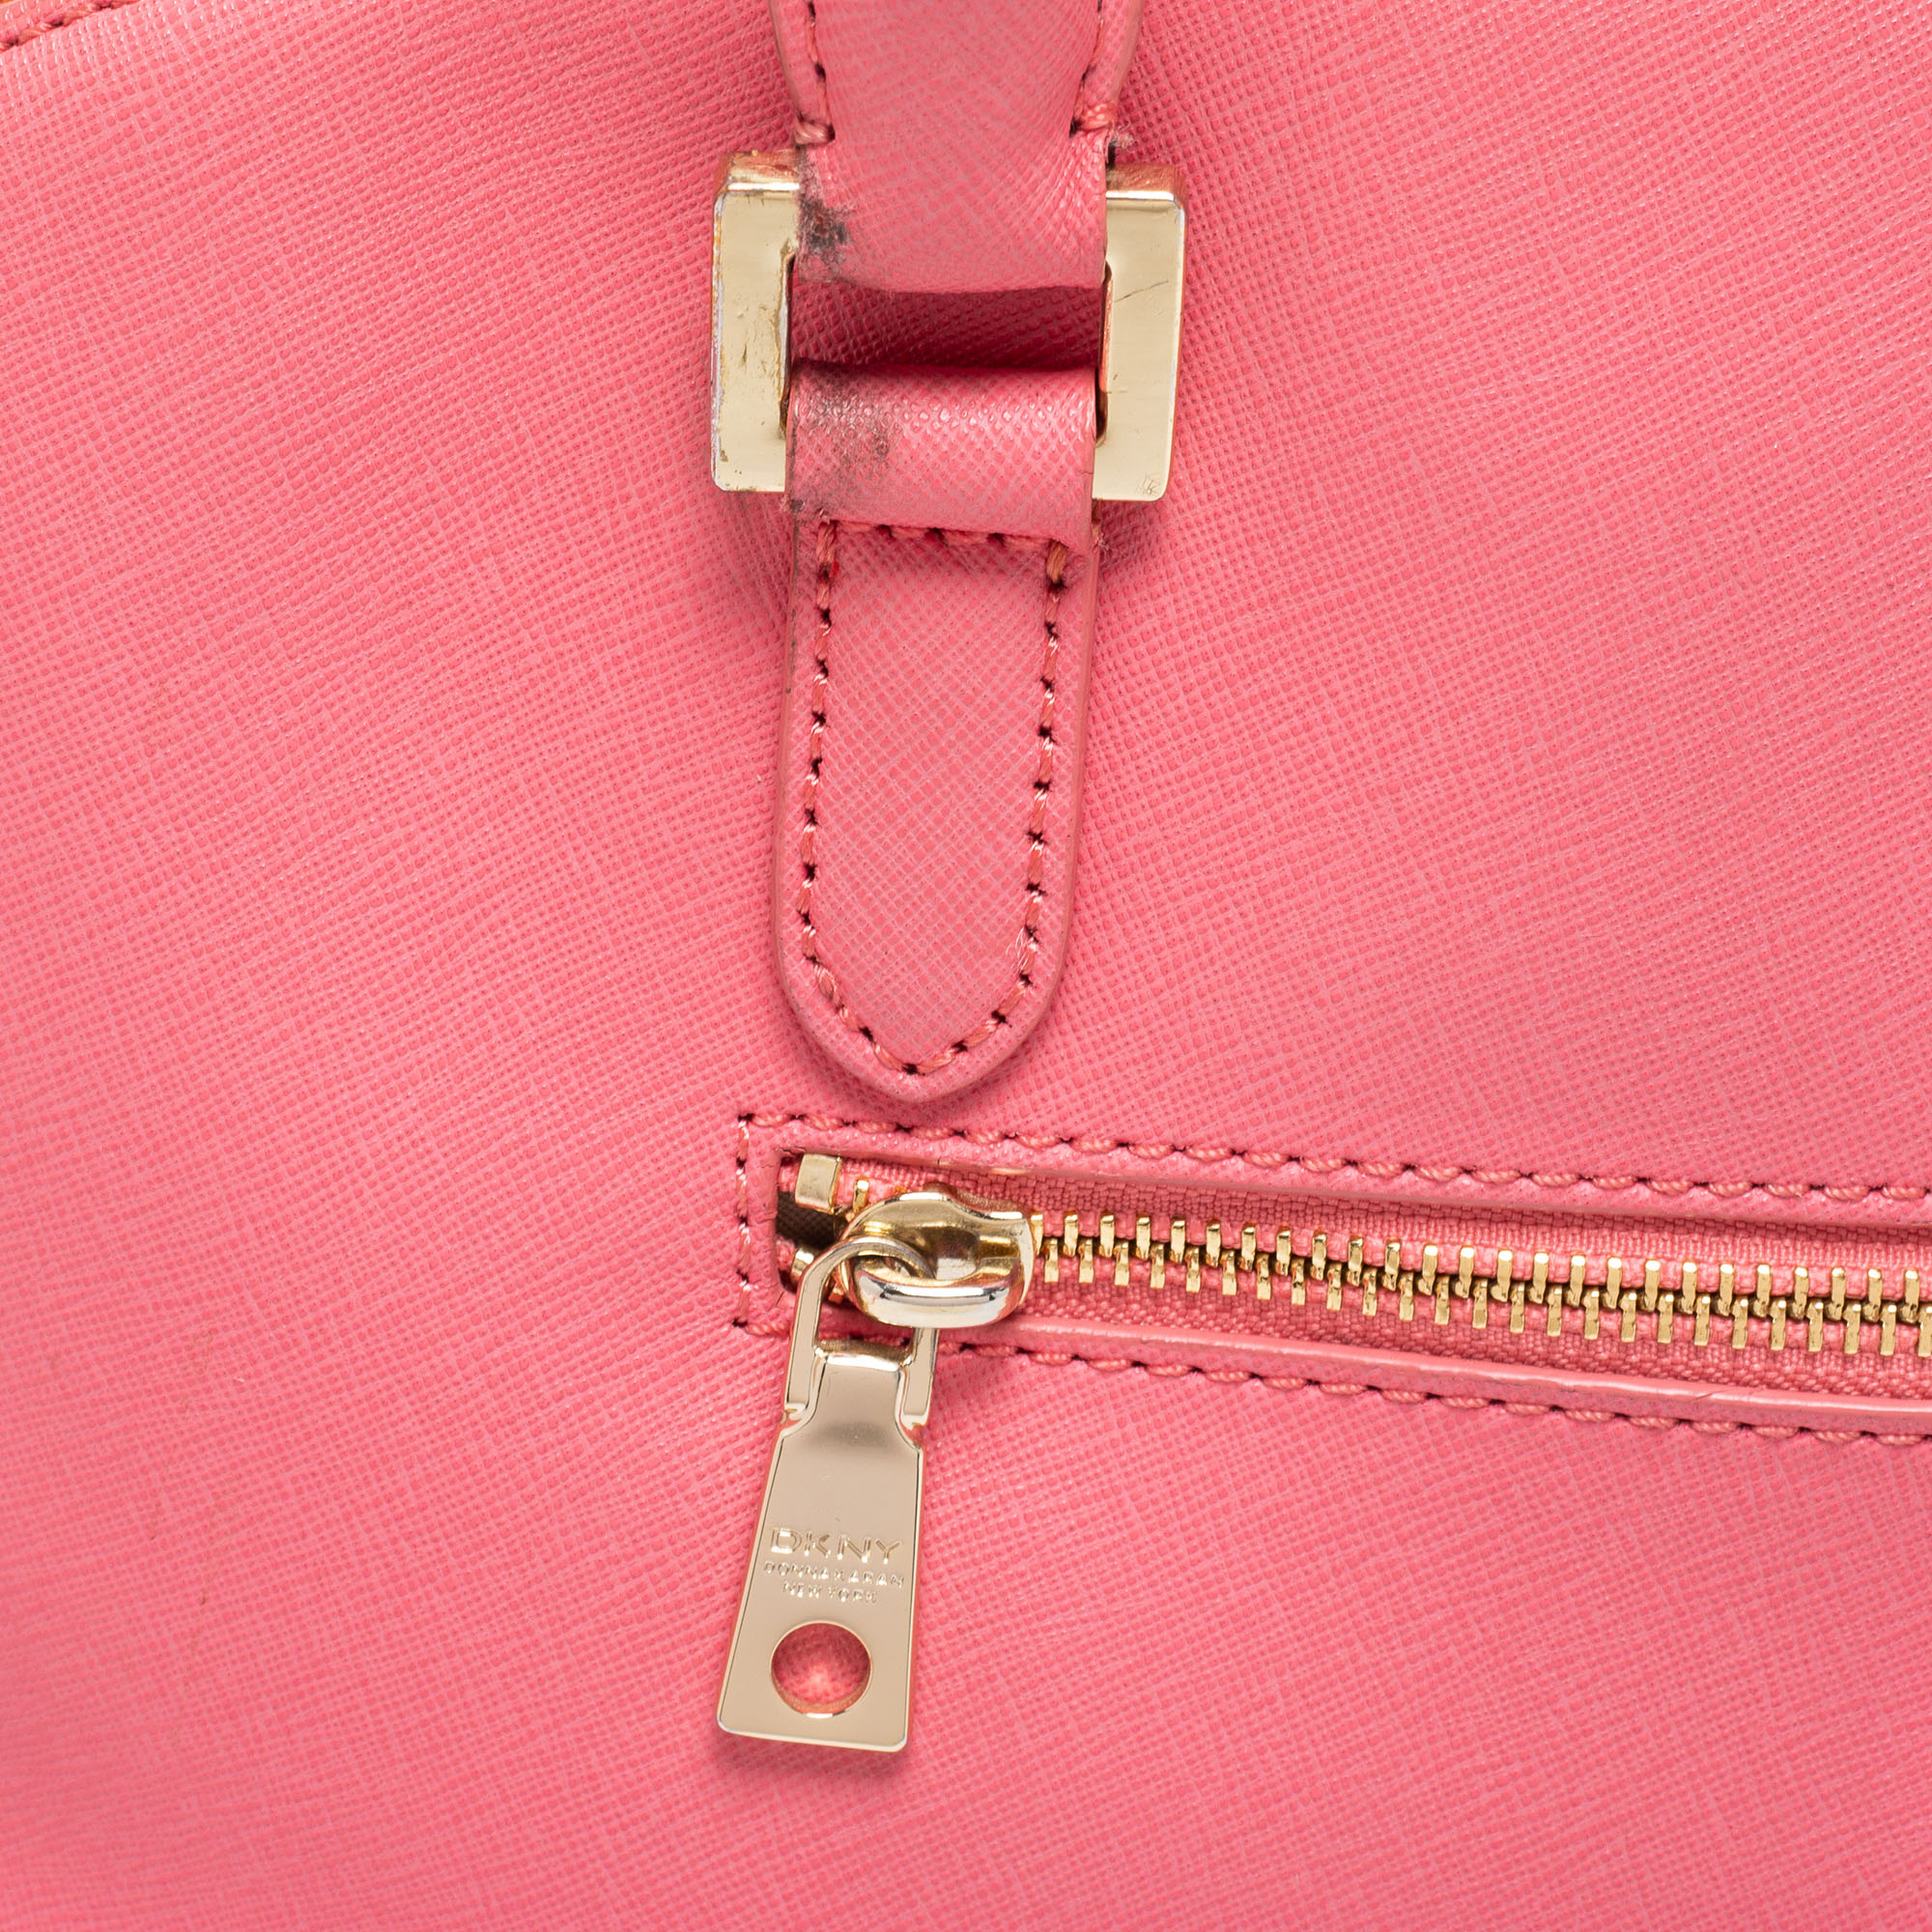 DKNY Pink Leather Dome Satchel